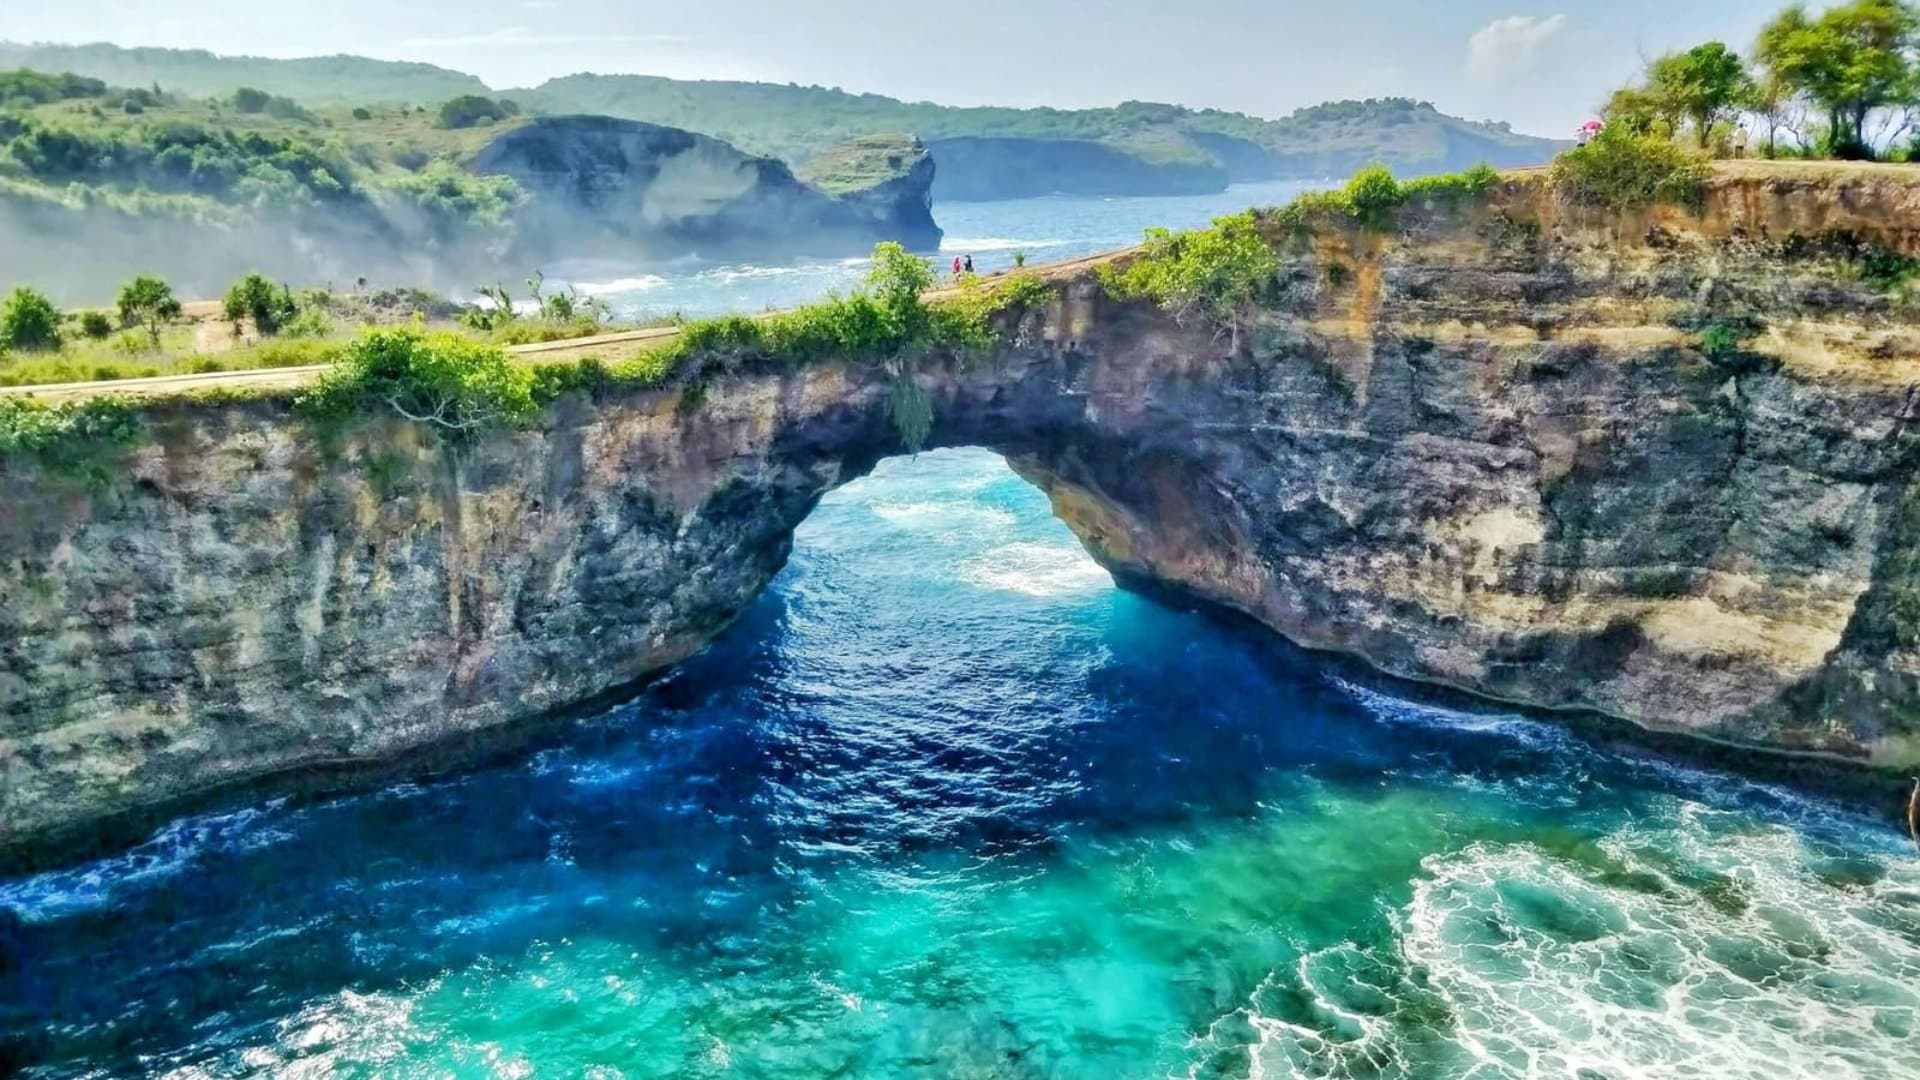 An image of a natural arch in Bali